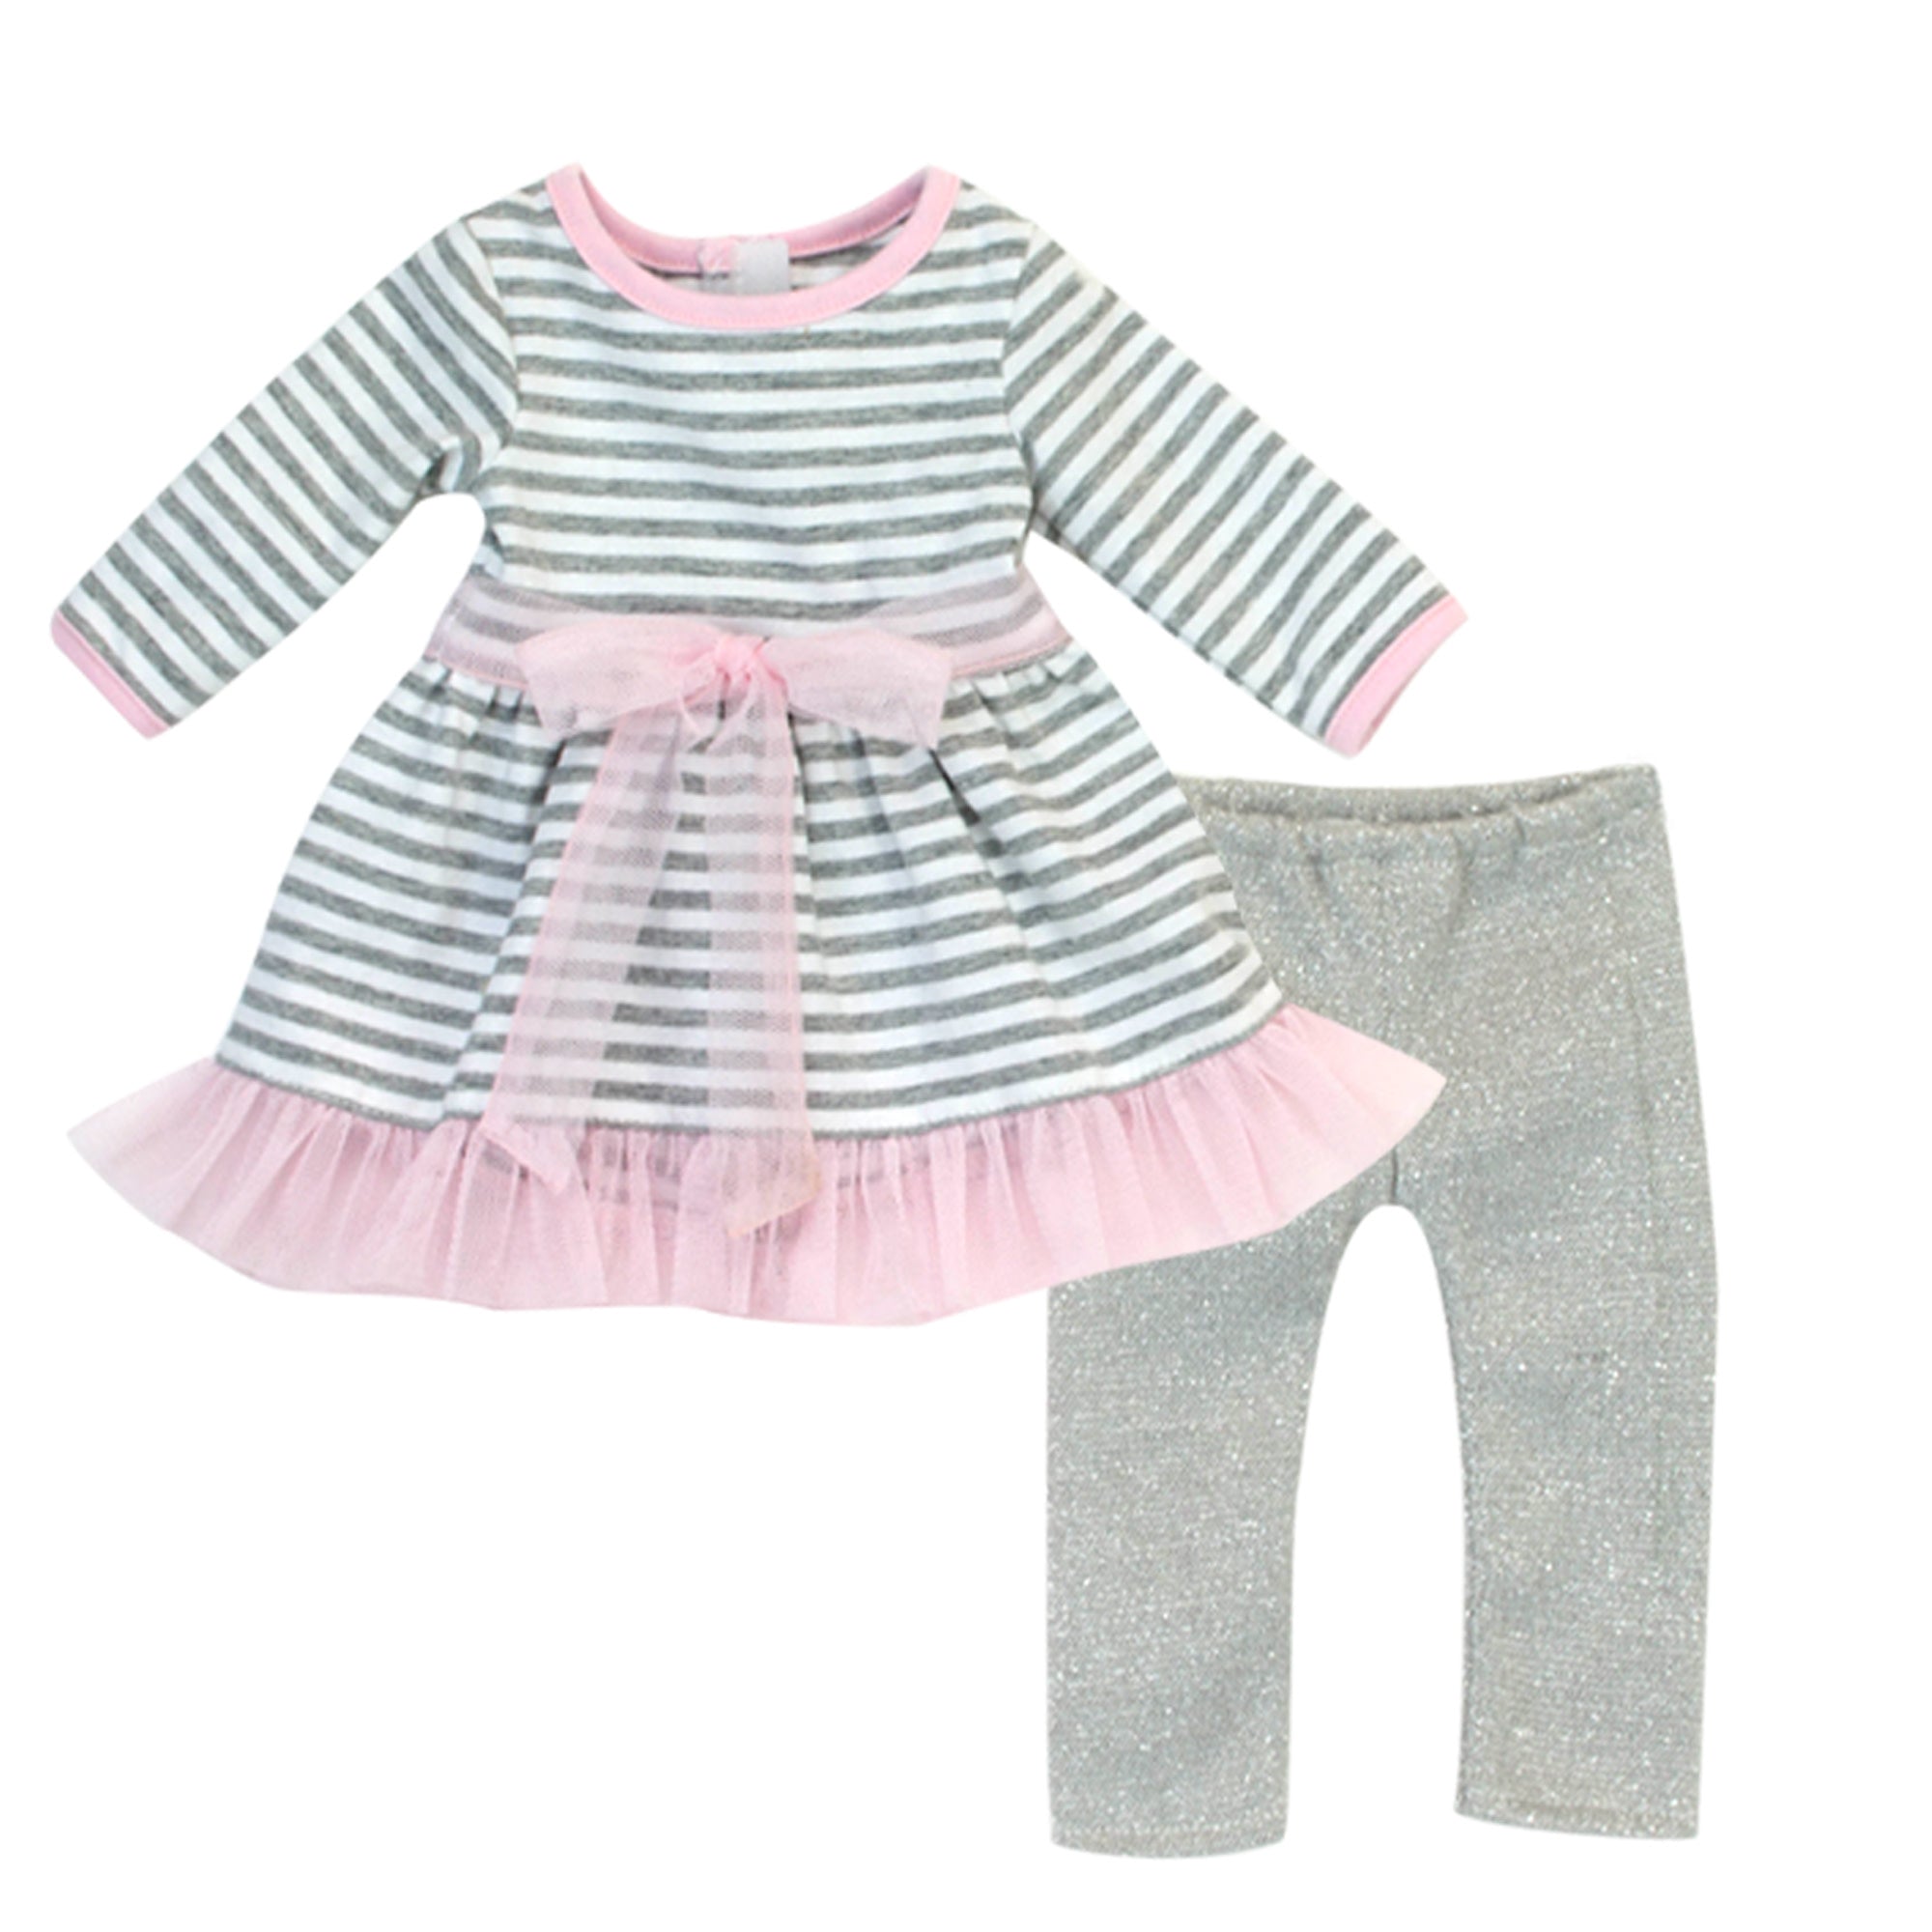 Sophia’s Long-Sleeved Striped Tulle Hem Sweater Dress, Knit Leggings with Sparkle Accents, & Tulle Flower Headband for 18” Dolls, Pink/Gray